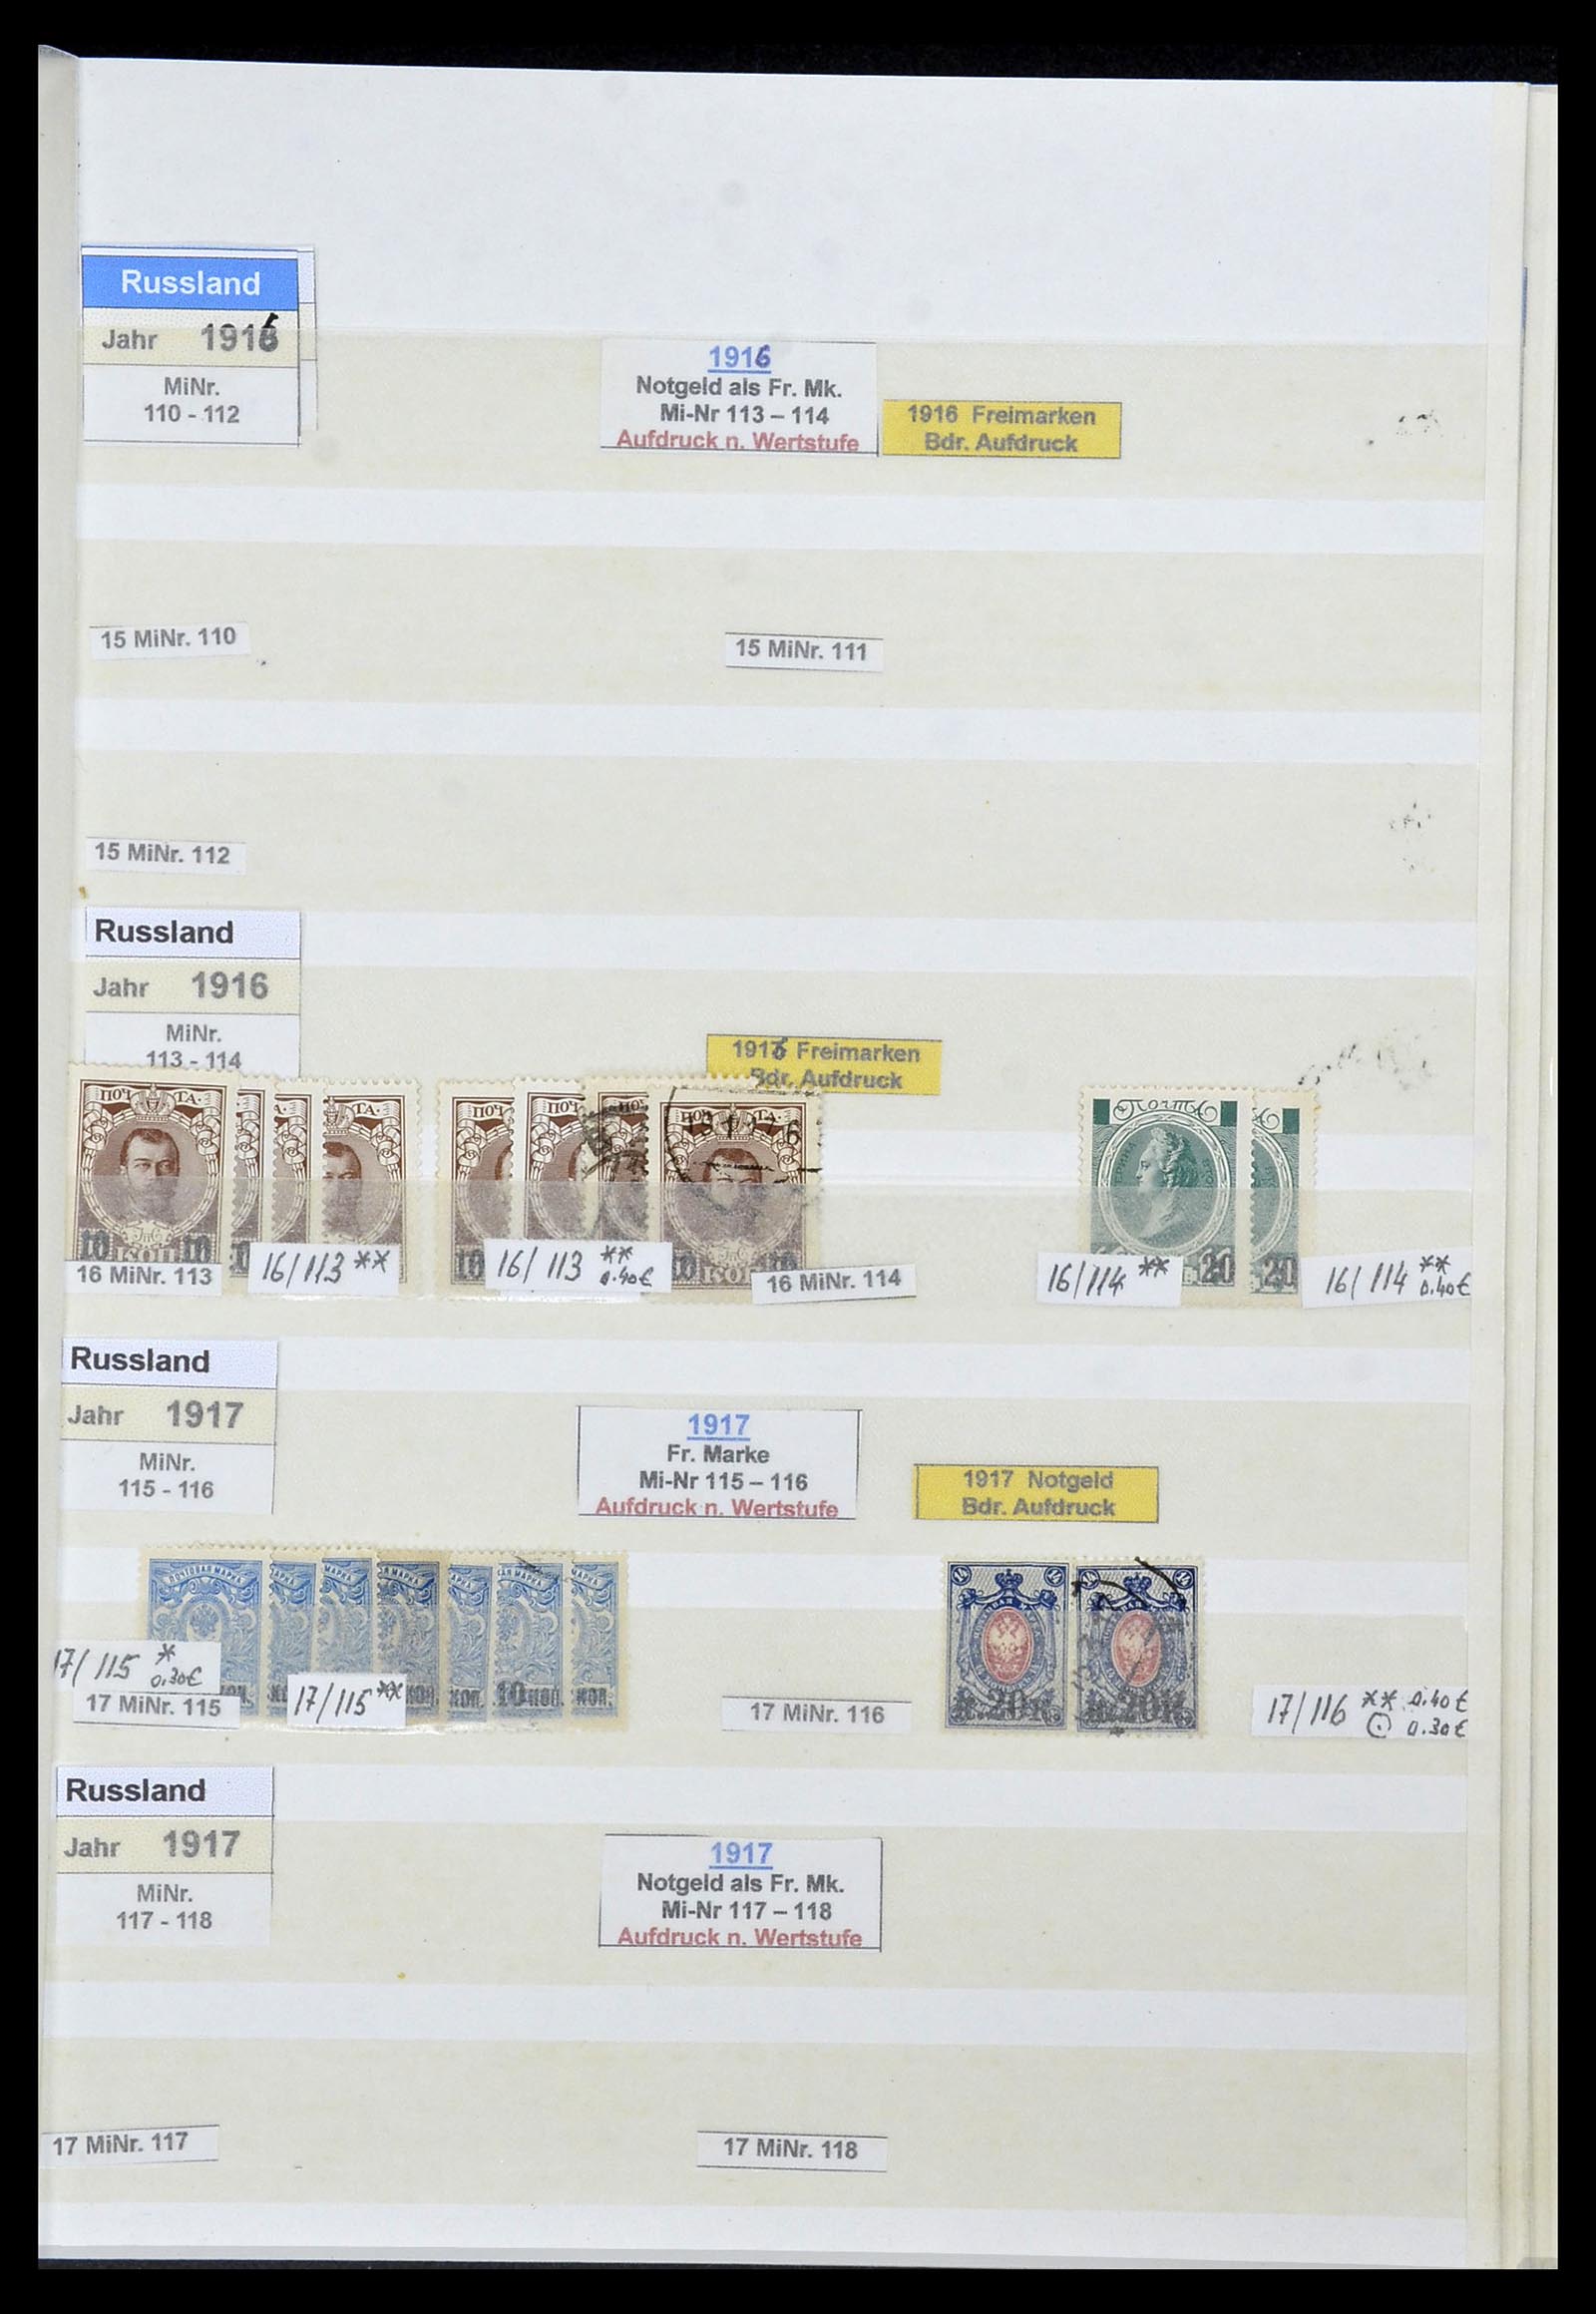 33973 019 - Stamp collection 33973 Russia 1865-2002.